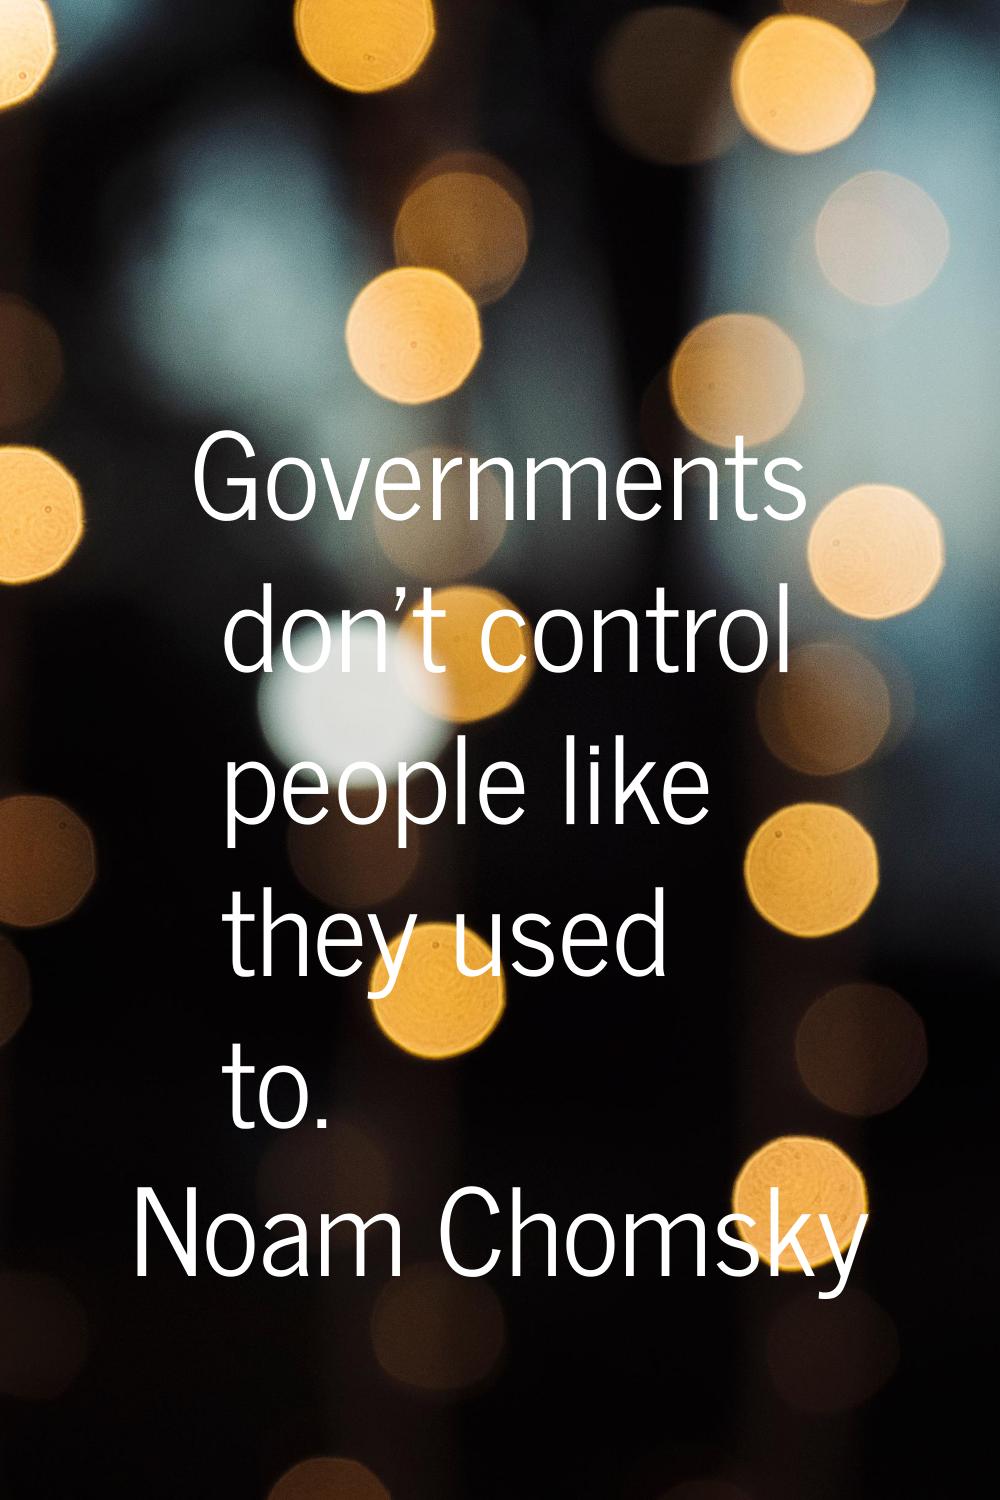 Governments don't control people like they used to.